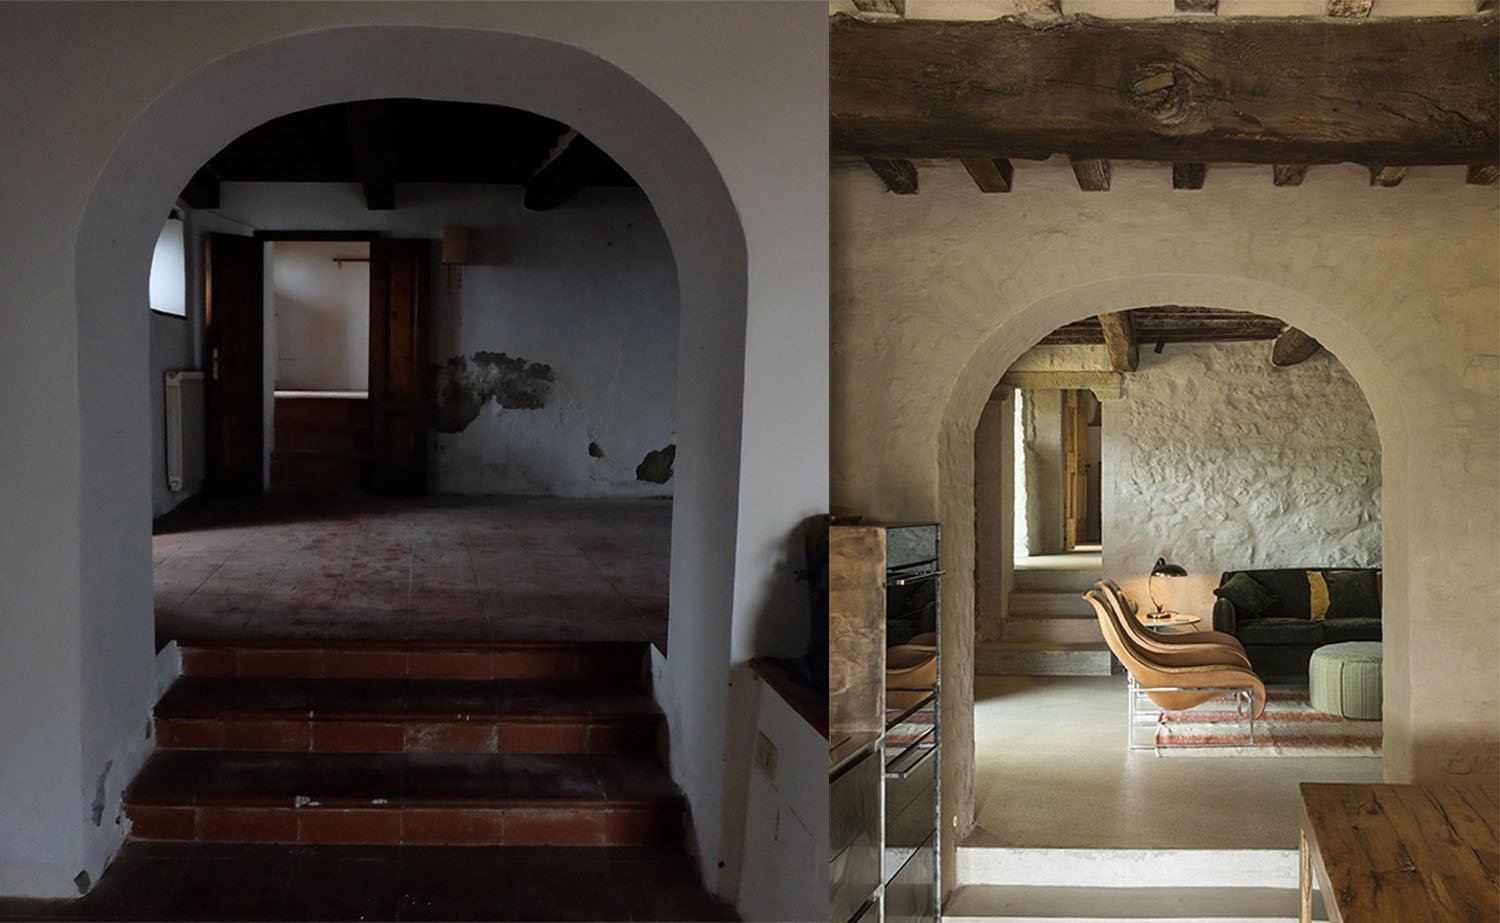 Before and after works | Matteo Fiorucci and Mattia Aquila